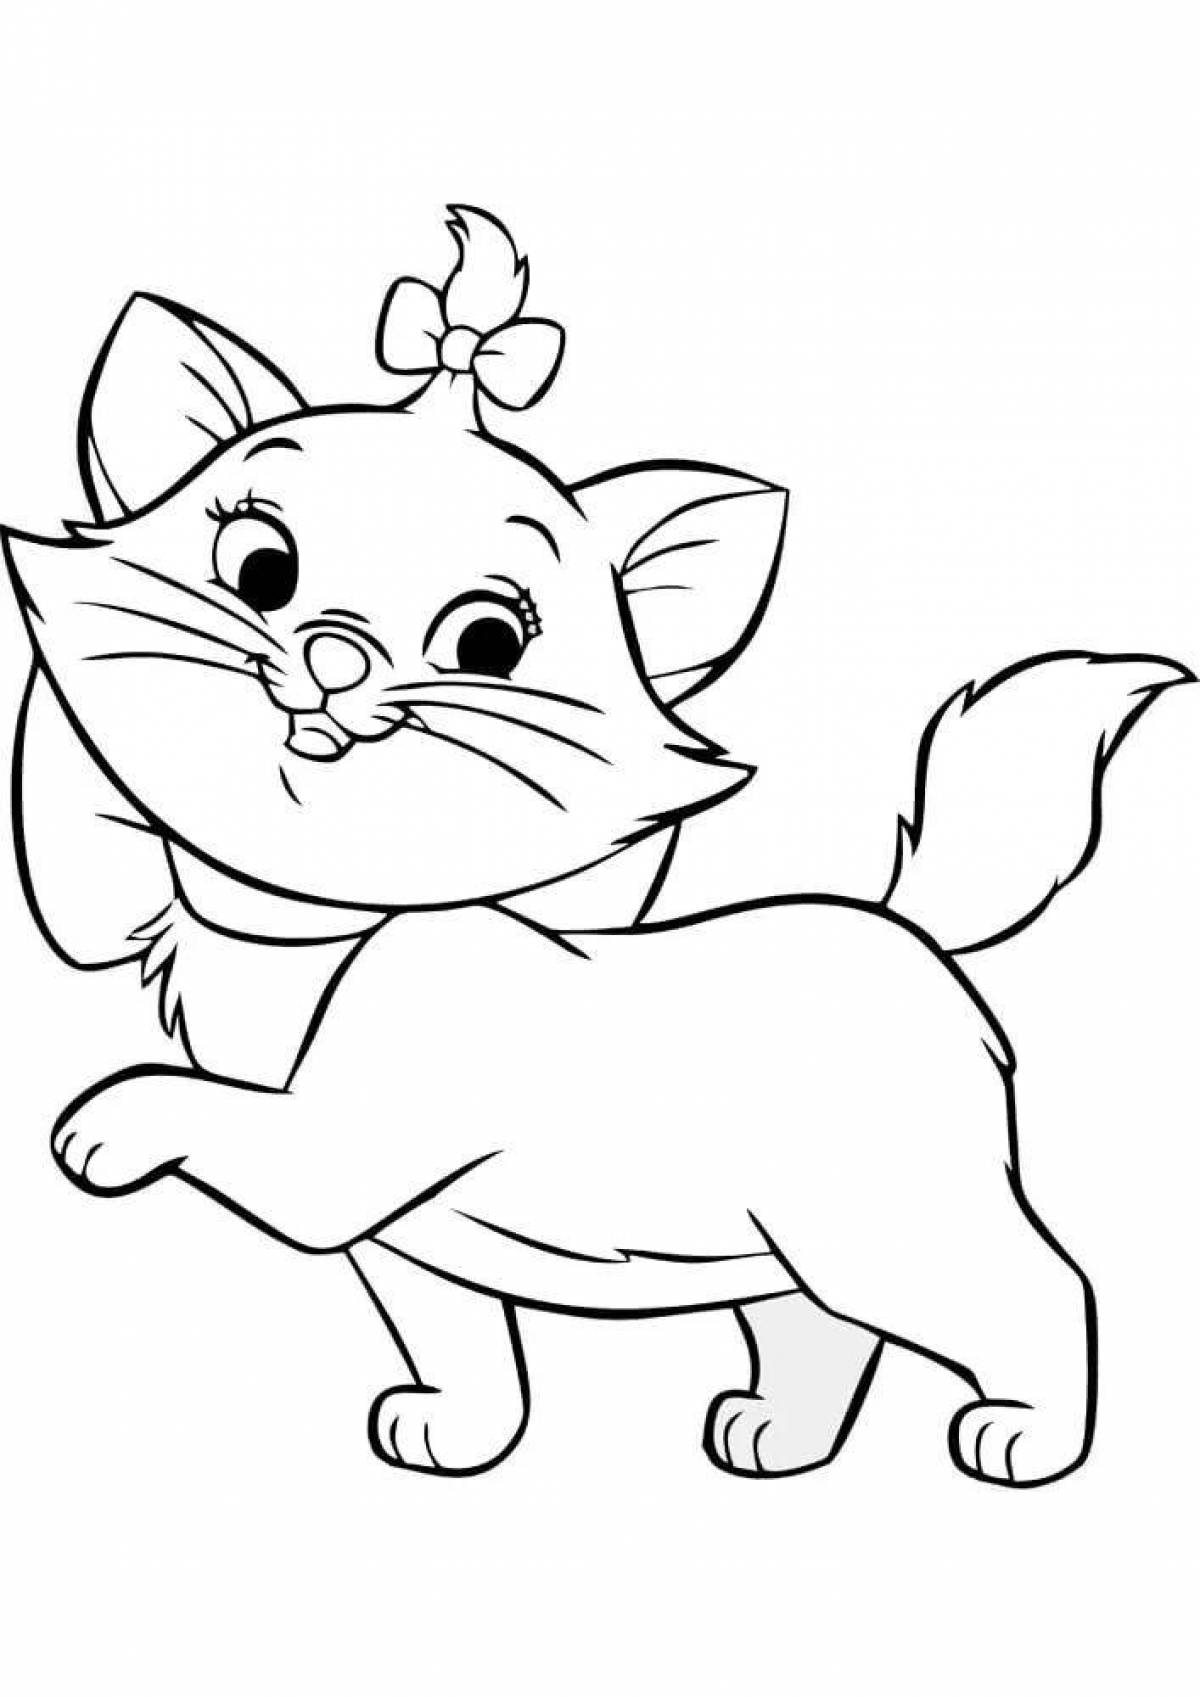 Marie Kitty's breathtaking coloring book